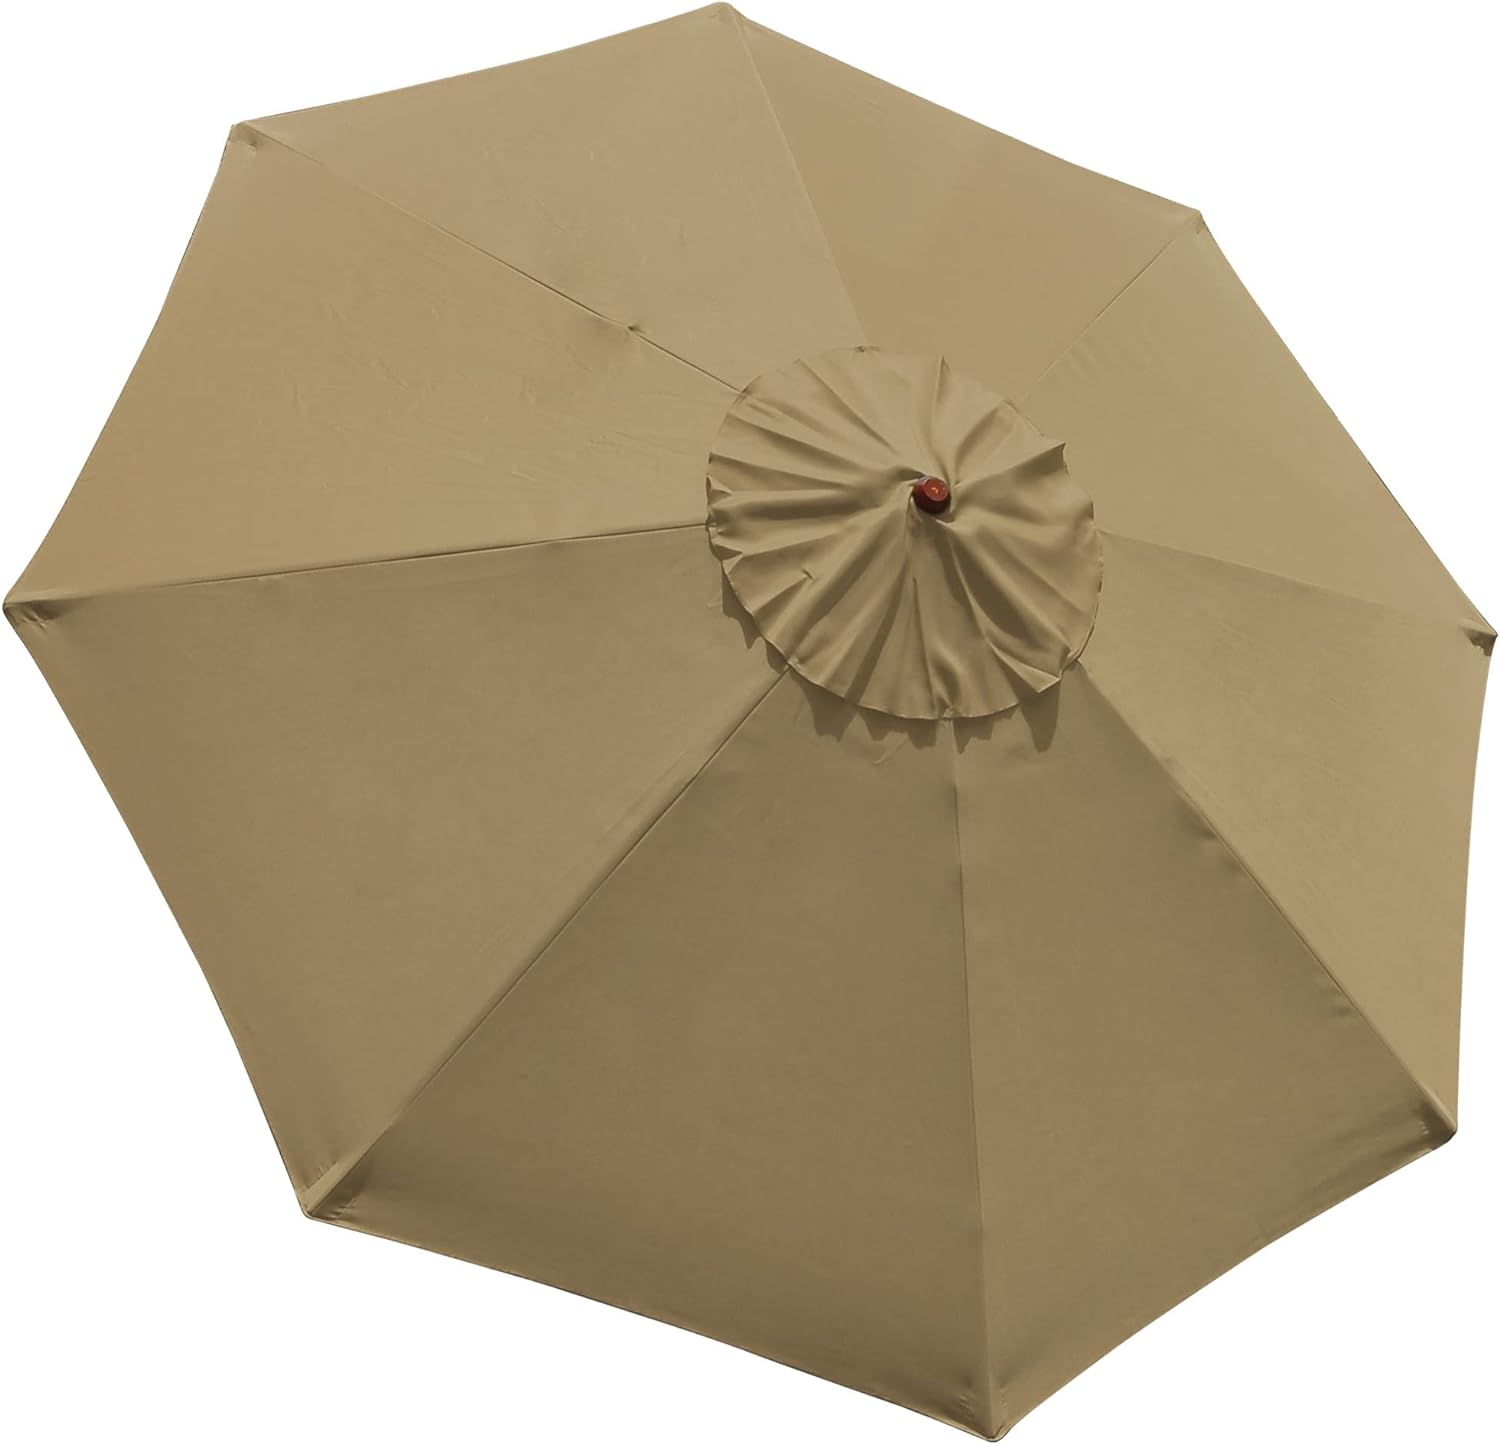 10Ft 8 Rib Umbrella Replacement Cover Canopy Patio Outdoor Market Deck Yard Top